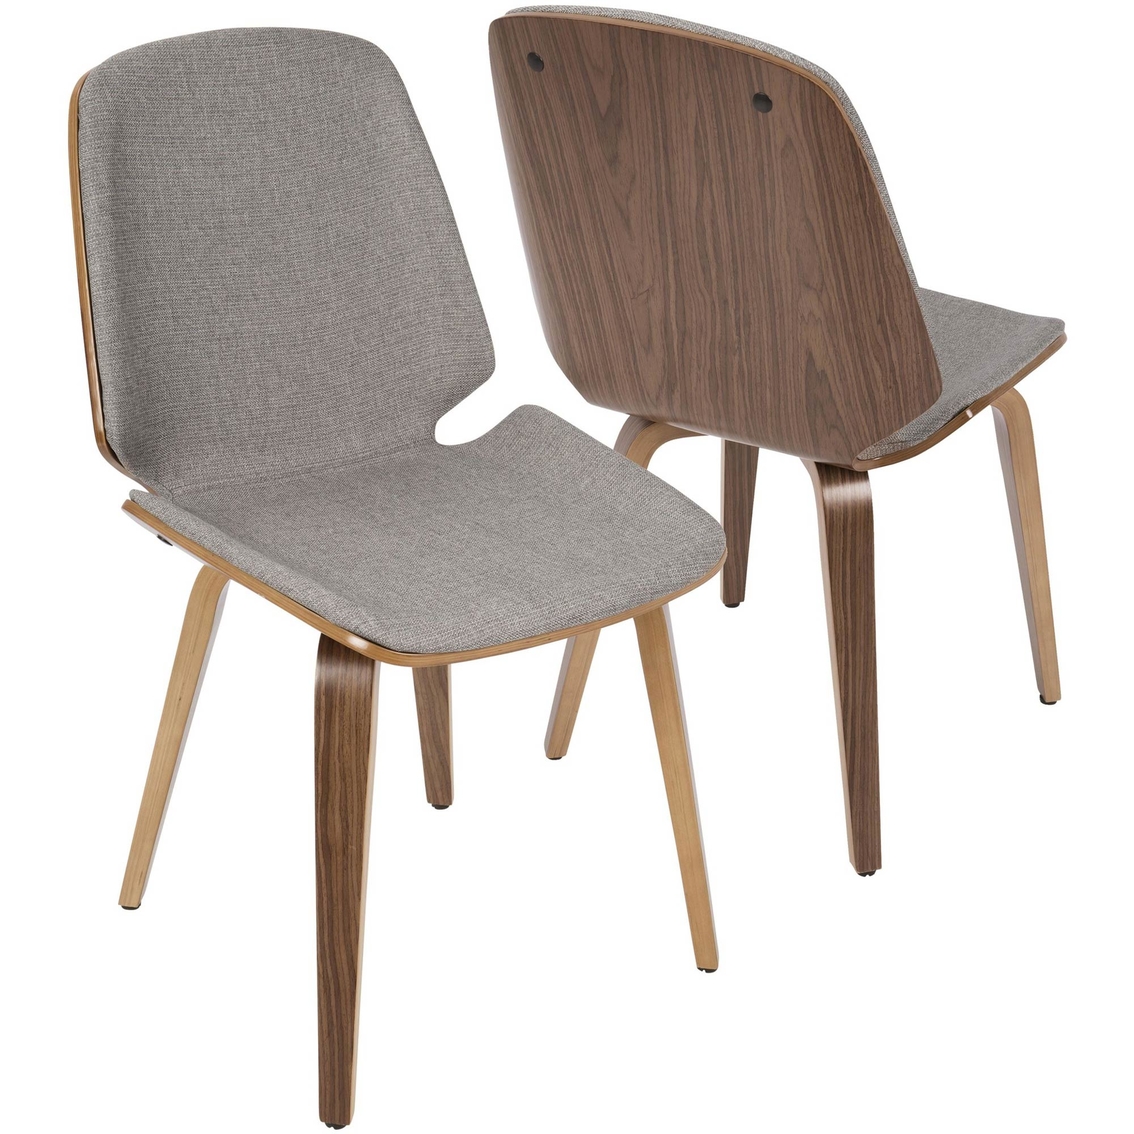 LumiSource Serena Dining Chair 2 pk. - Image 2 of 8